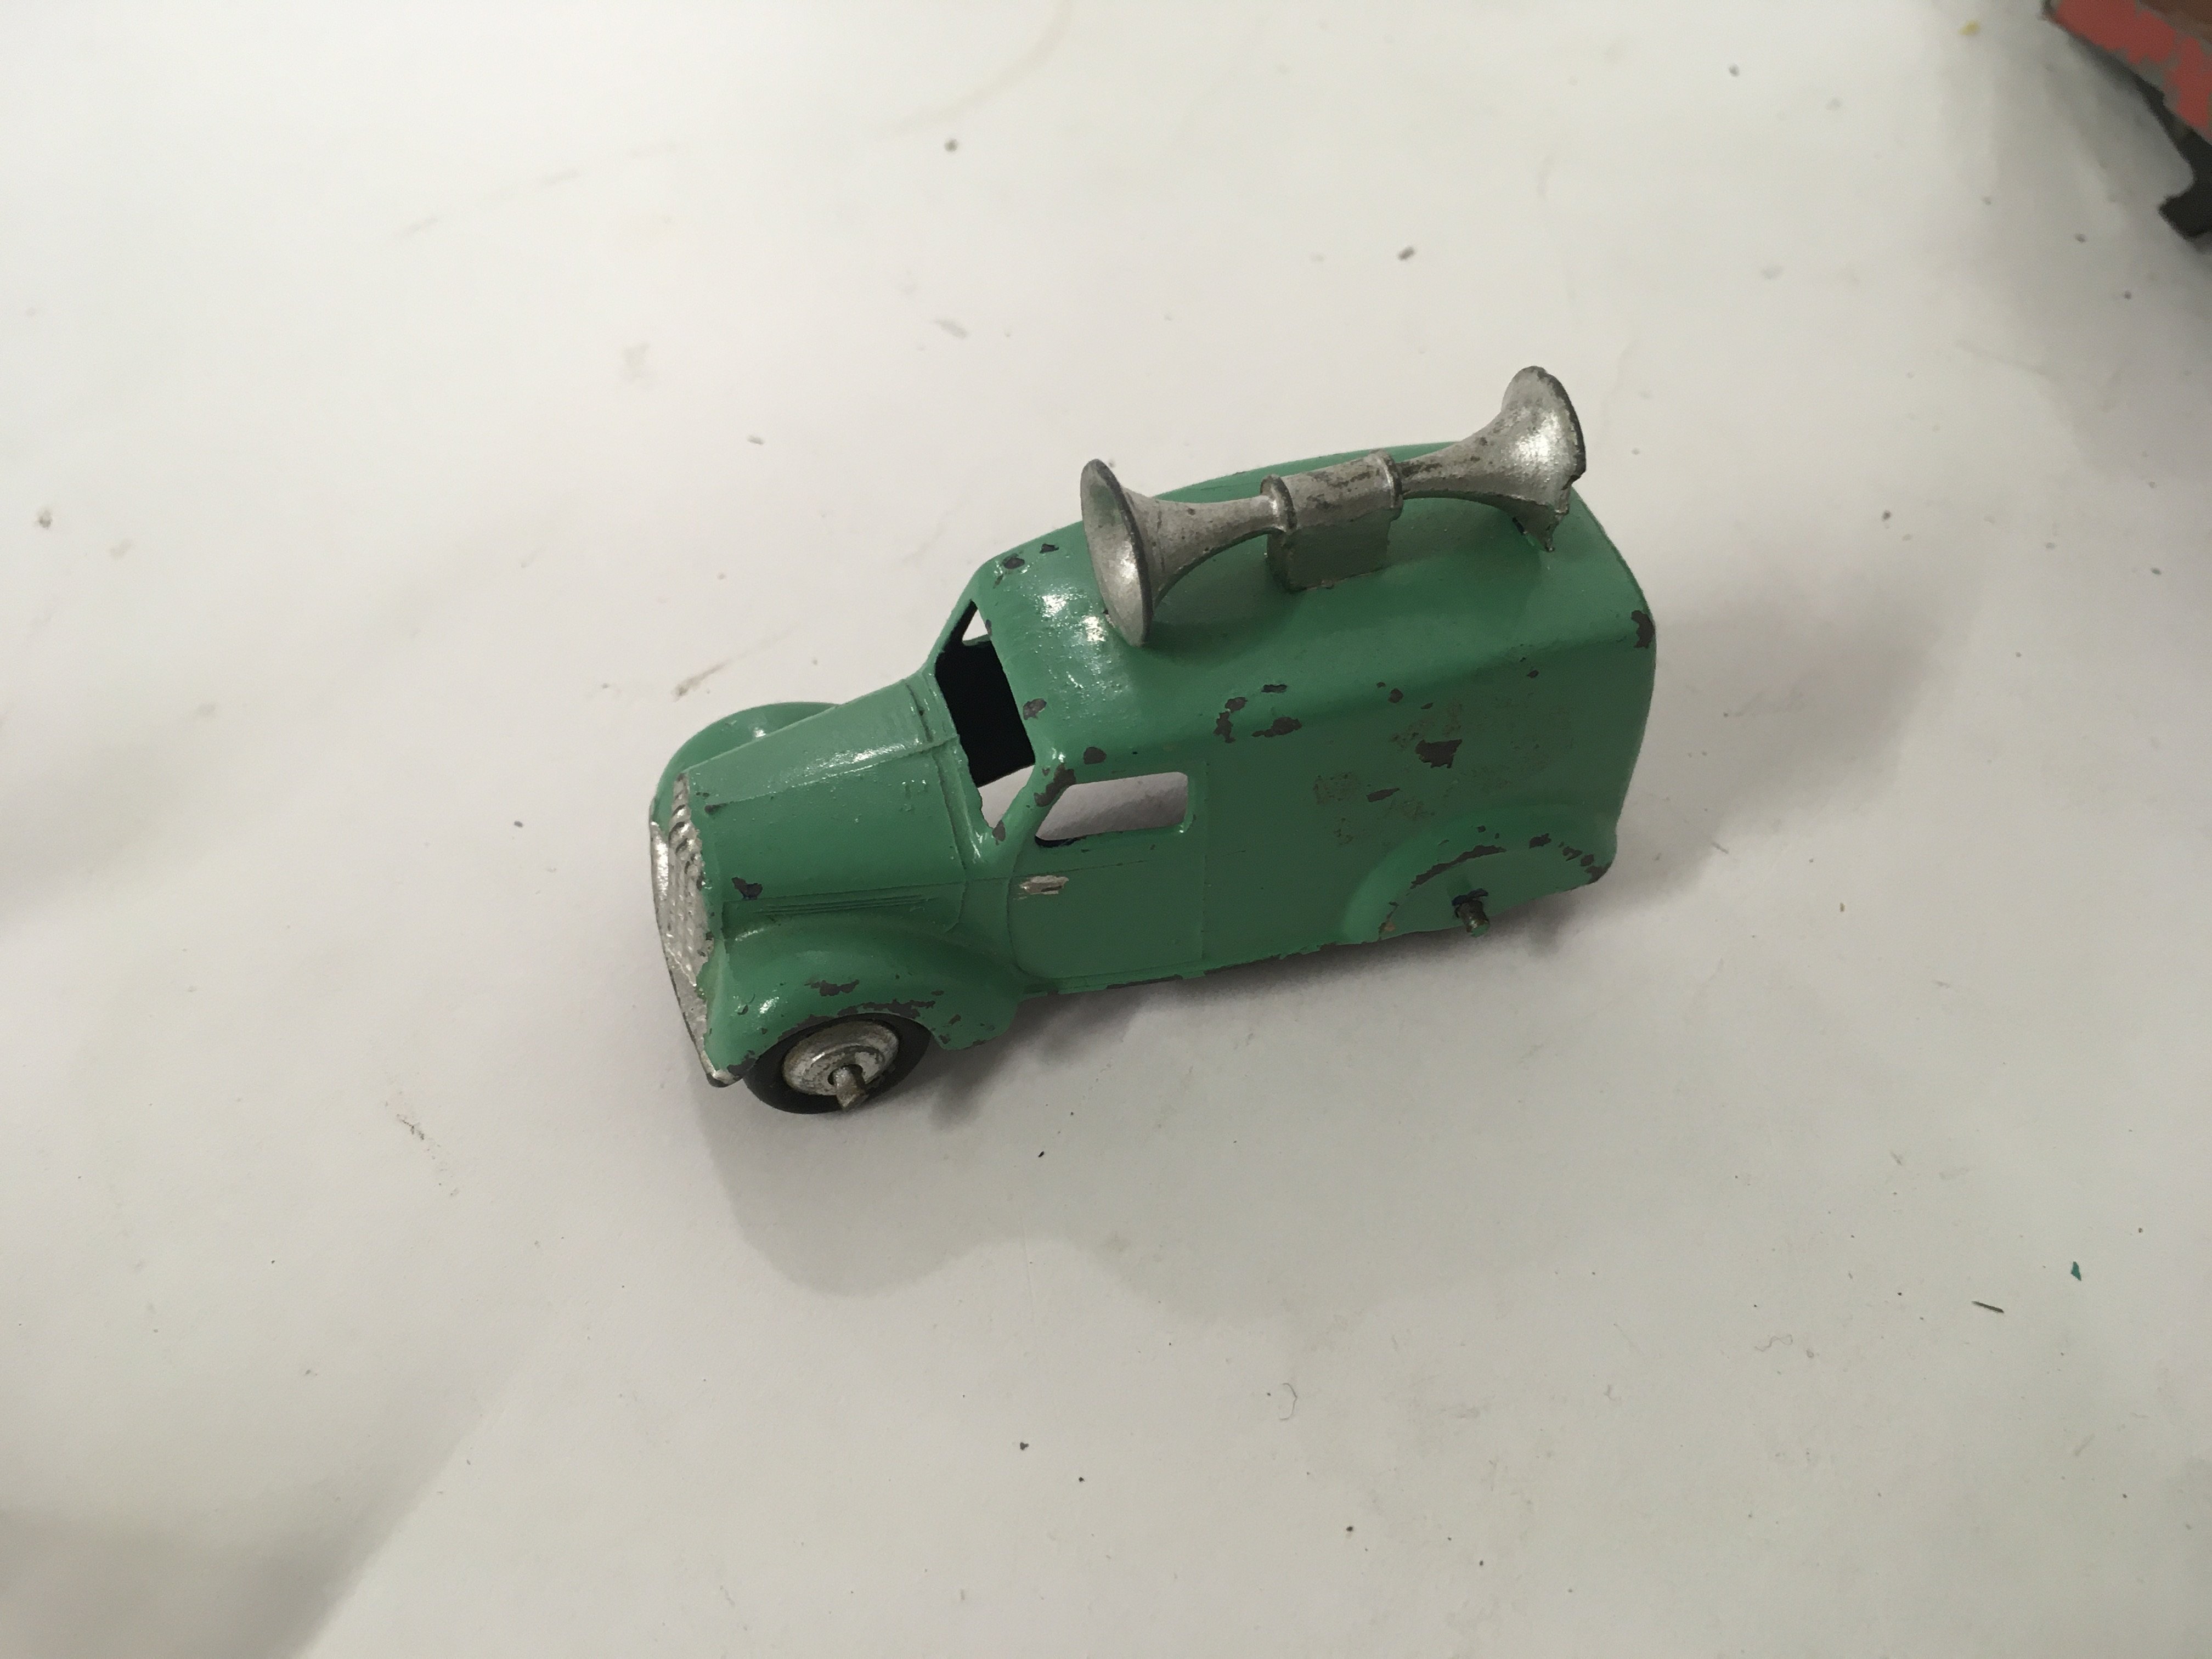 A collection of of Playworn Diecast vehicles by Di - Image 3 of 4